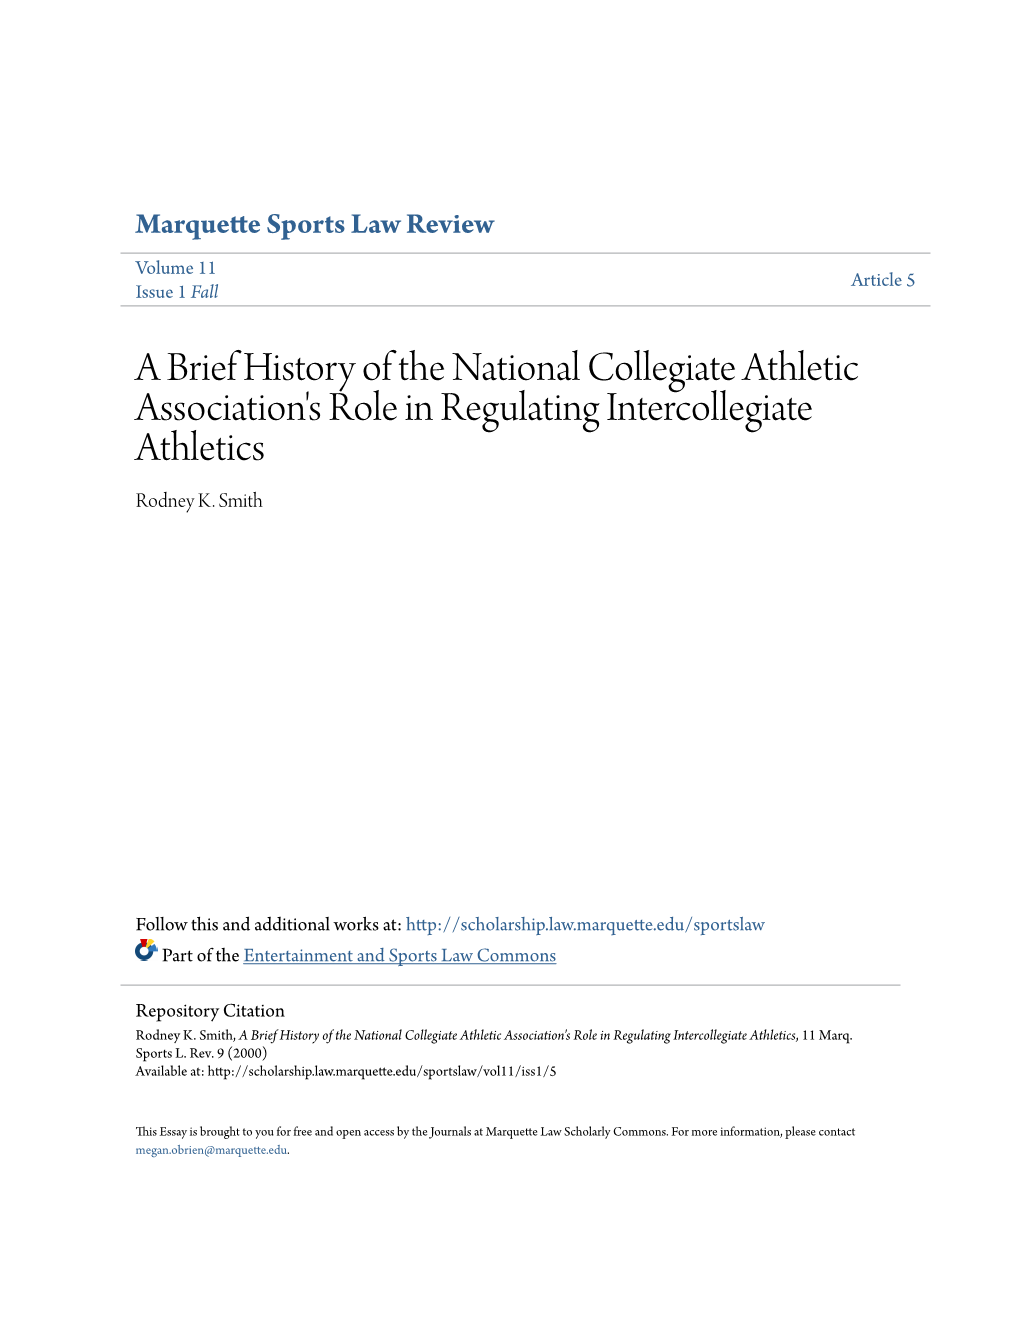 A Brief History of the National Collegiate Athletic Association's Role in Regulating Intercollegiate Athletics Rodney K